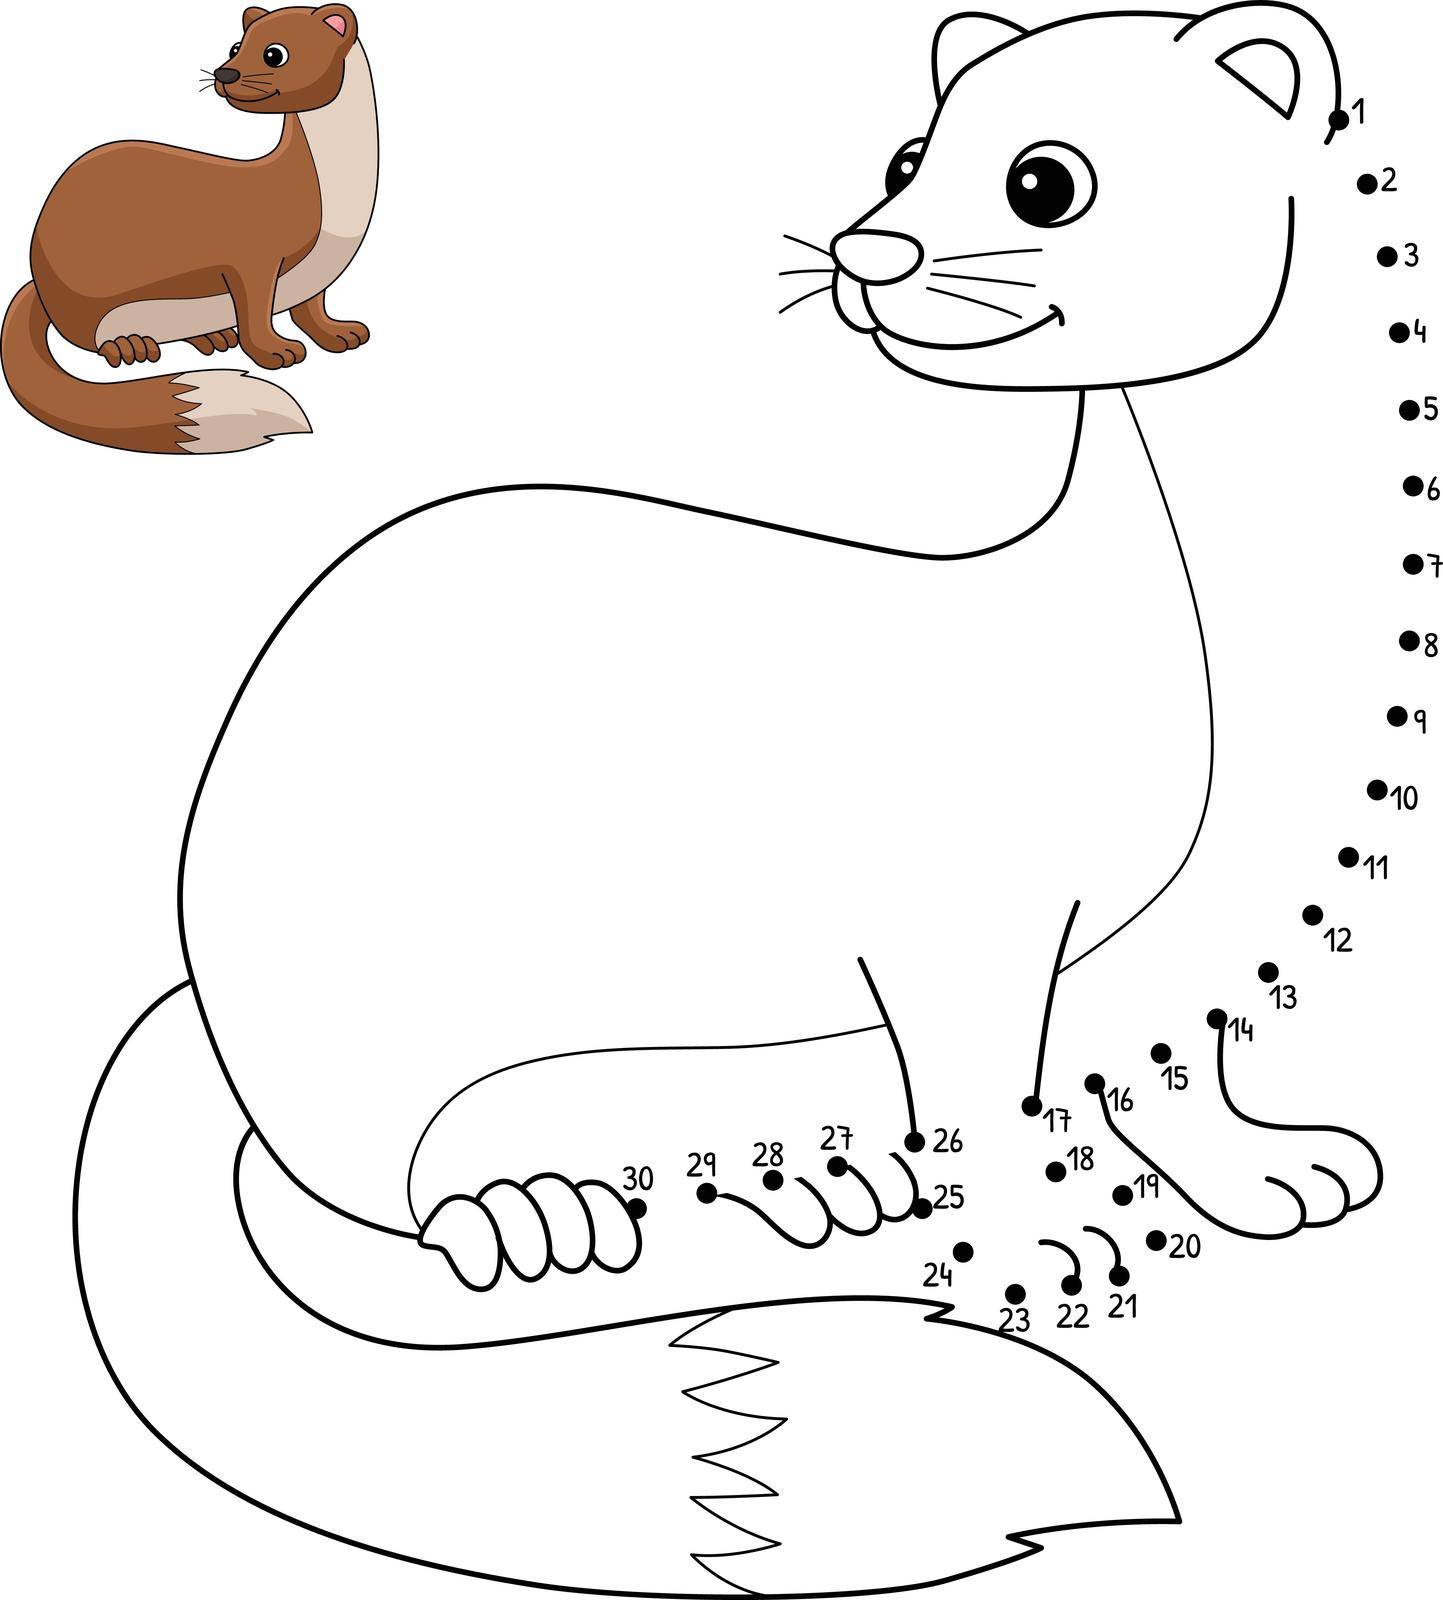 A cute and funny connect-the-dots coloring page of a Weasel Animal. Provides hours of coloring fun for children. Color, this page is very easy. Suitable for little kids and toddlers.